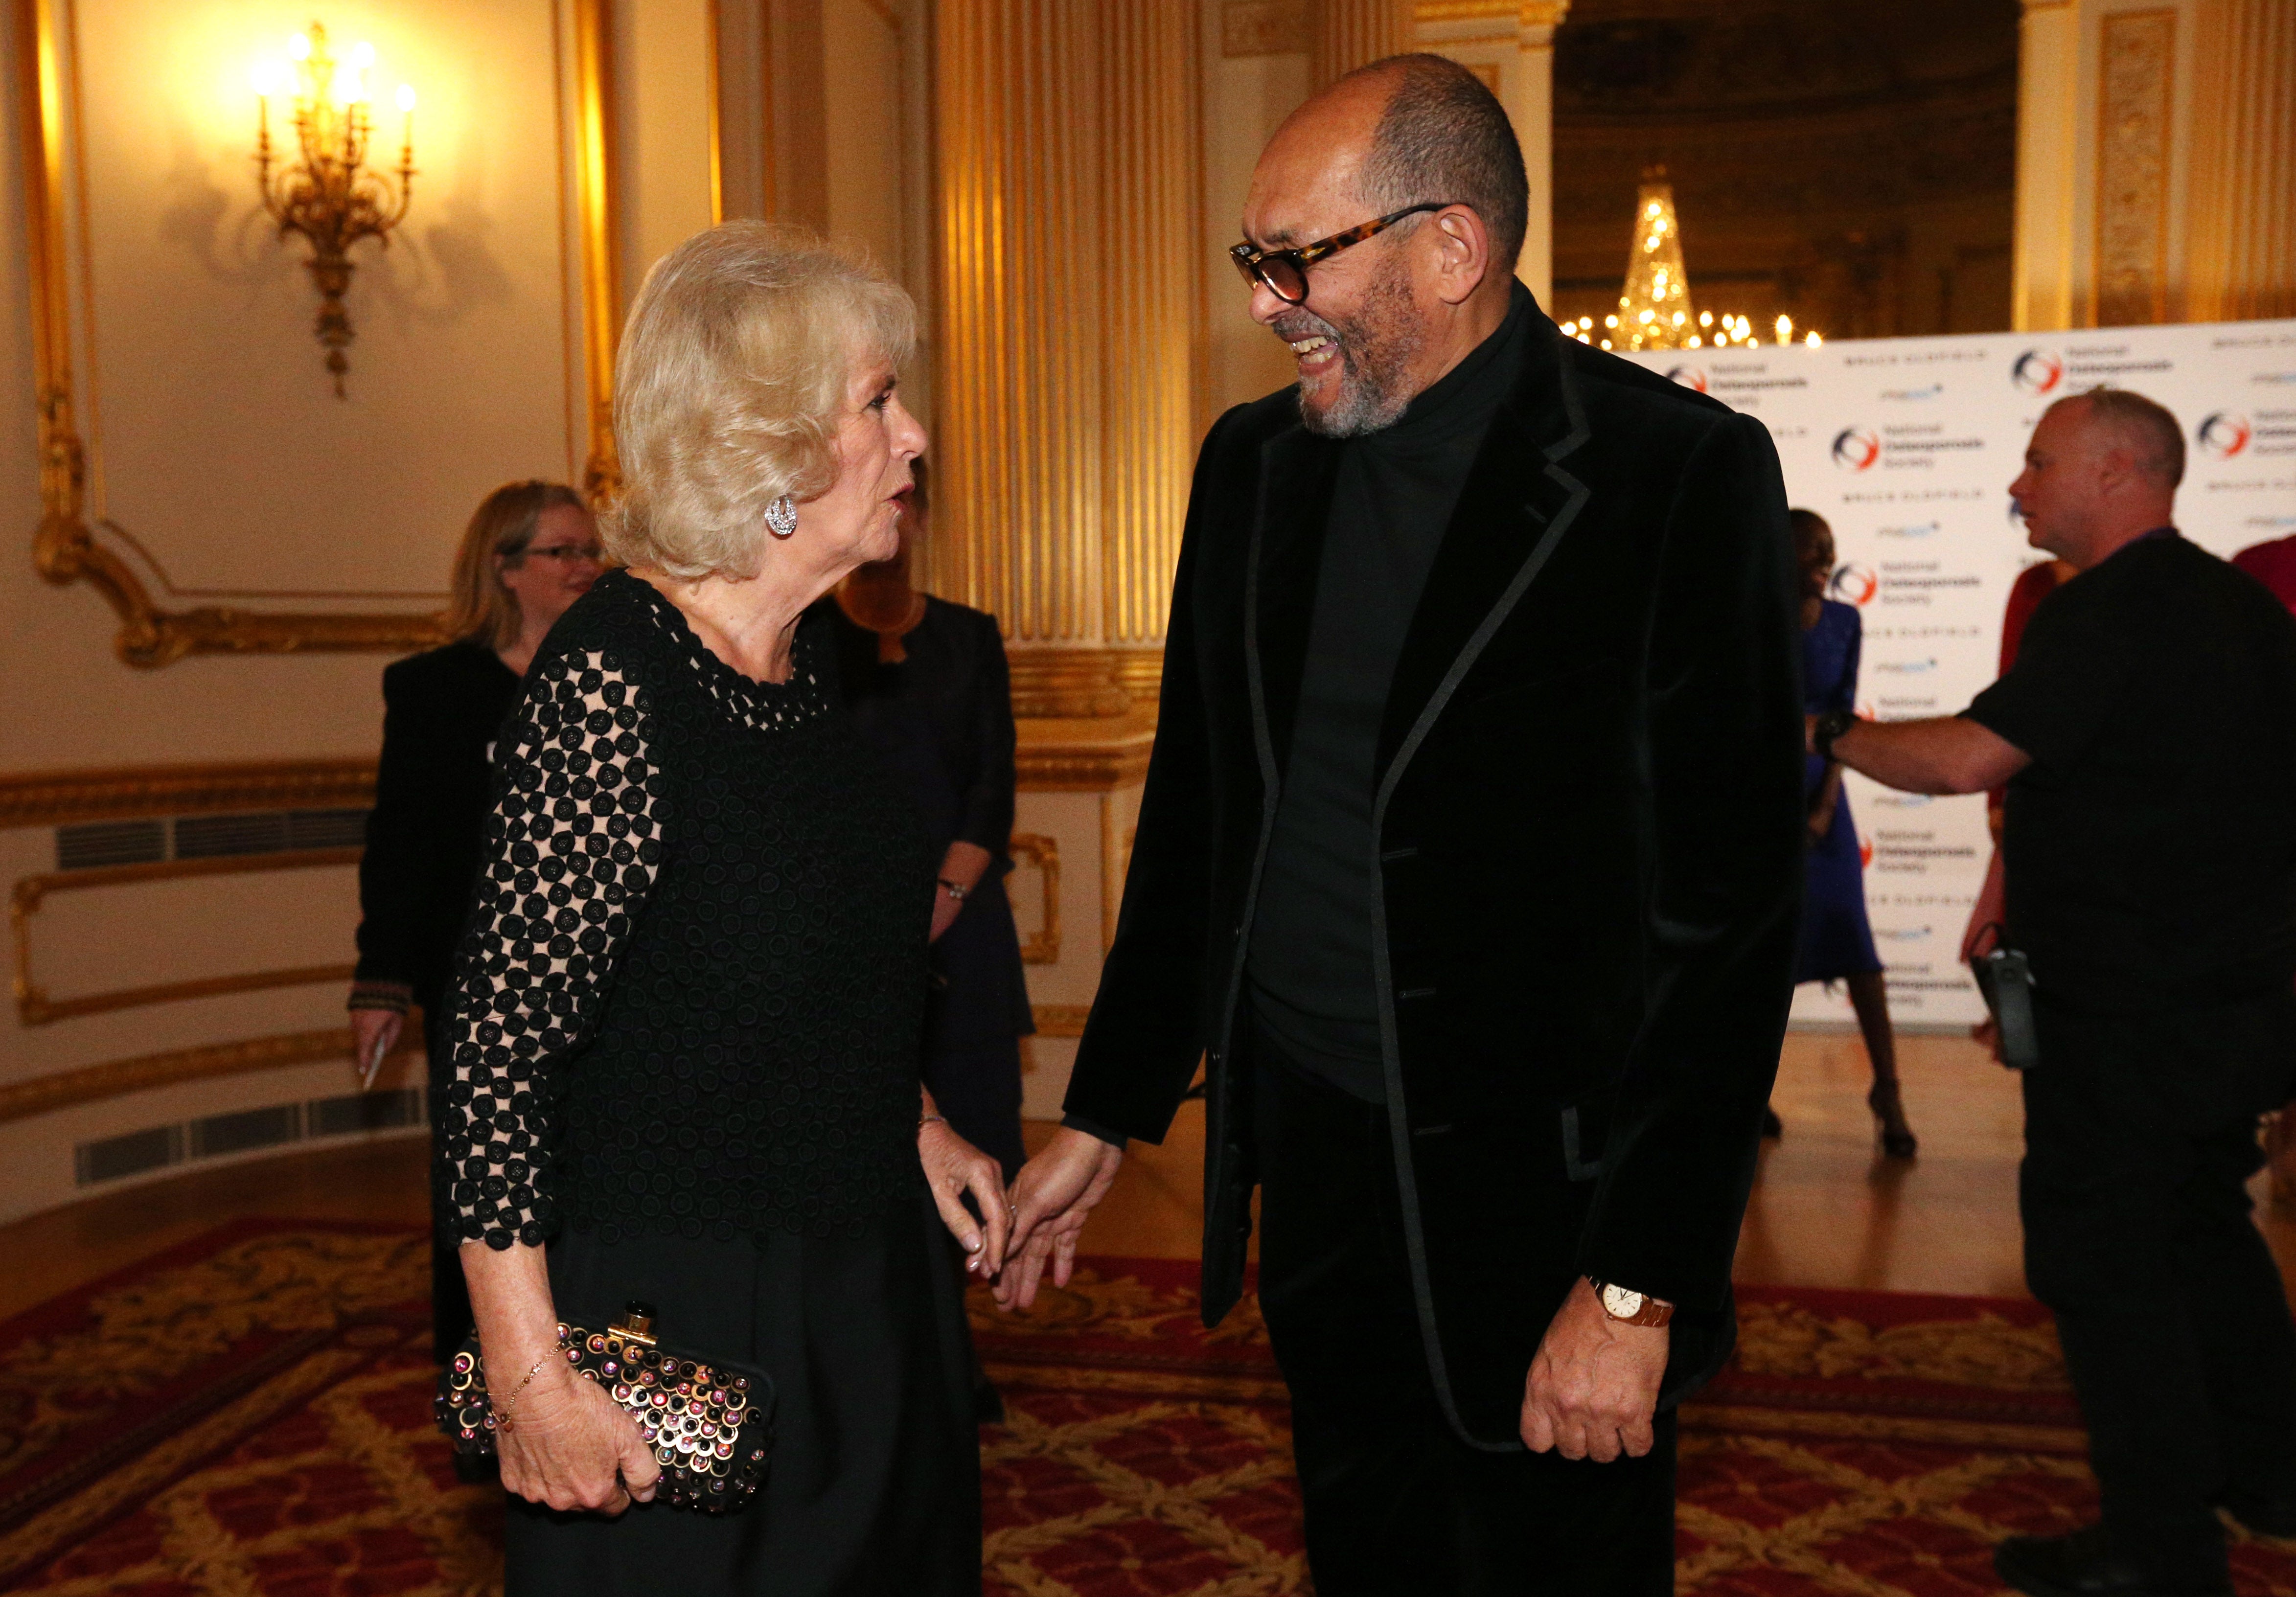 Bruce Oldfield is greeted by Camilla, Duchess of Cornwall during the Bruce Oldfield Fashion Show at Lancaster House in support of the National Osteoporosis Society on November 15, 2017